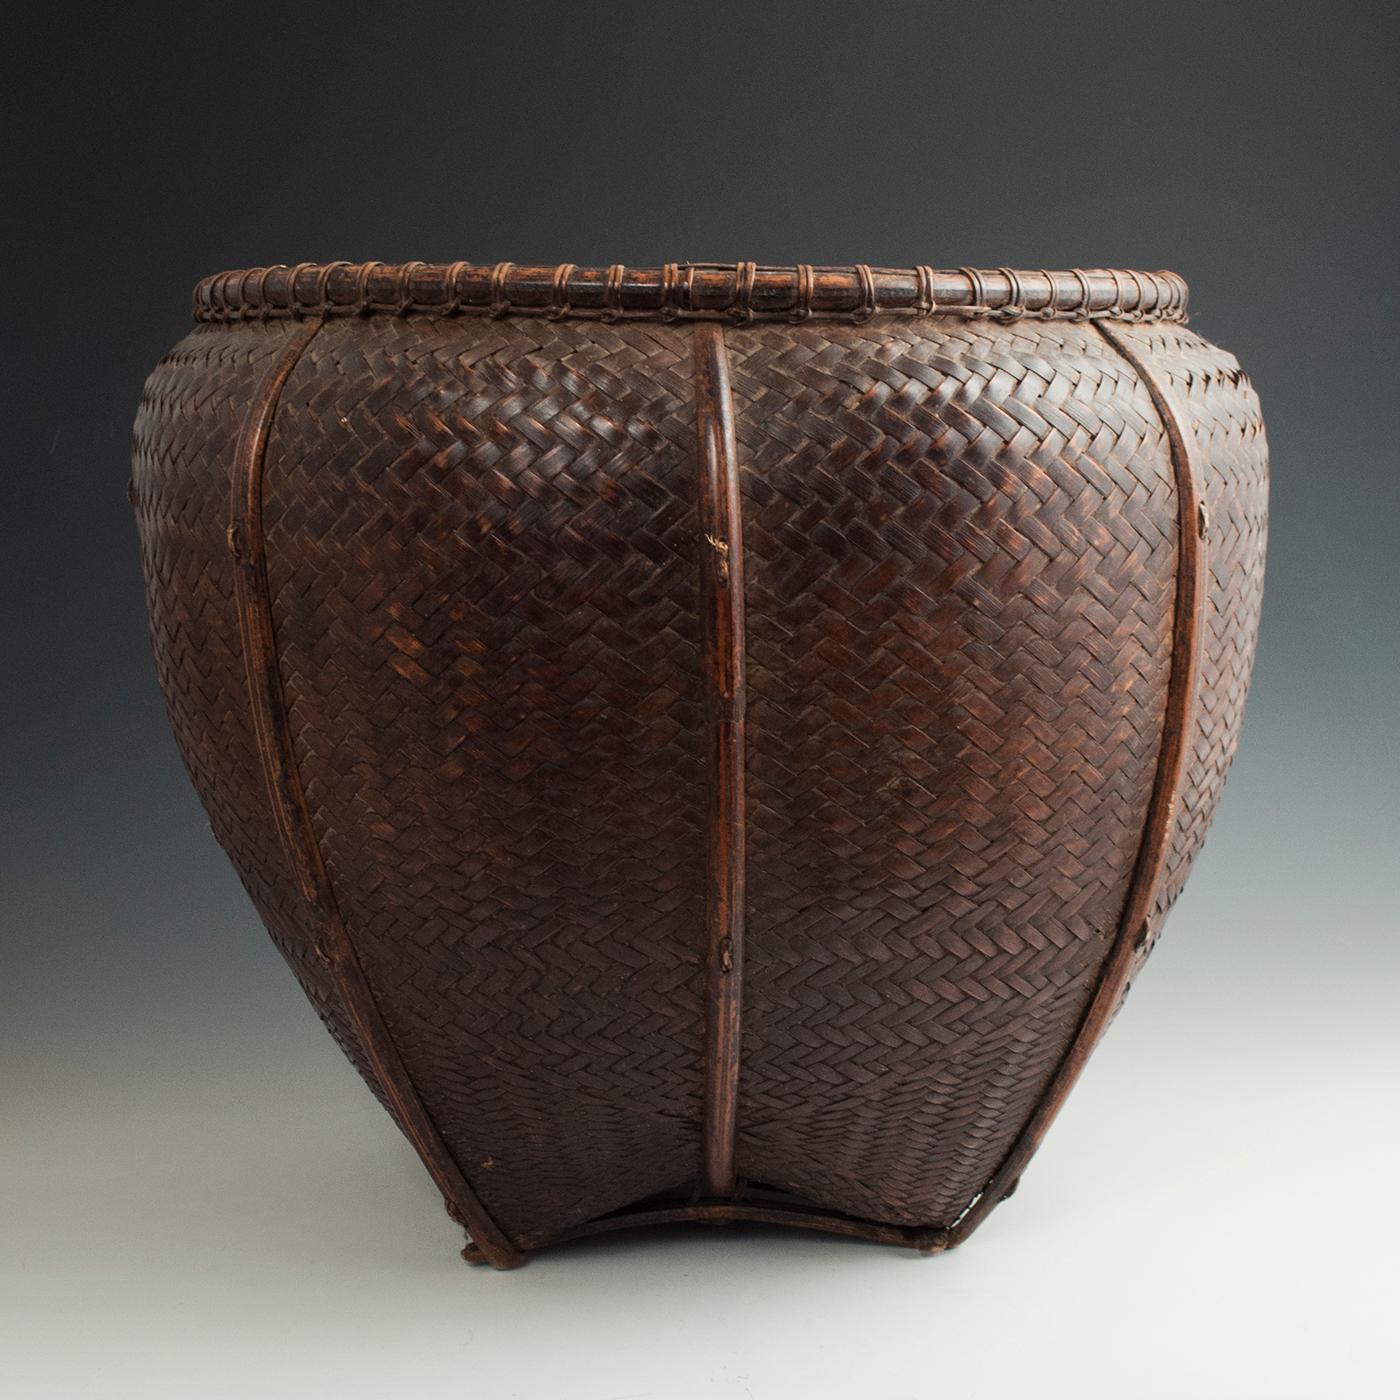 Early to mid-20th century Bamboo Collecting Basket, Attapeu Area, Laos

A large, gracefully shaped, tightly woven carrying basket from the Laotian people. It has two integrated wire loops for the shoulder straps and a slightly flattened back where